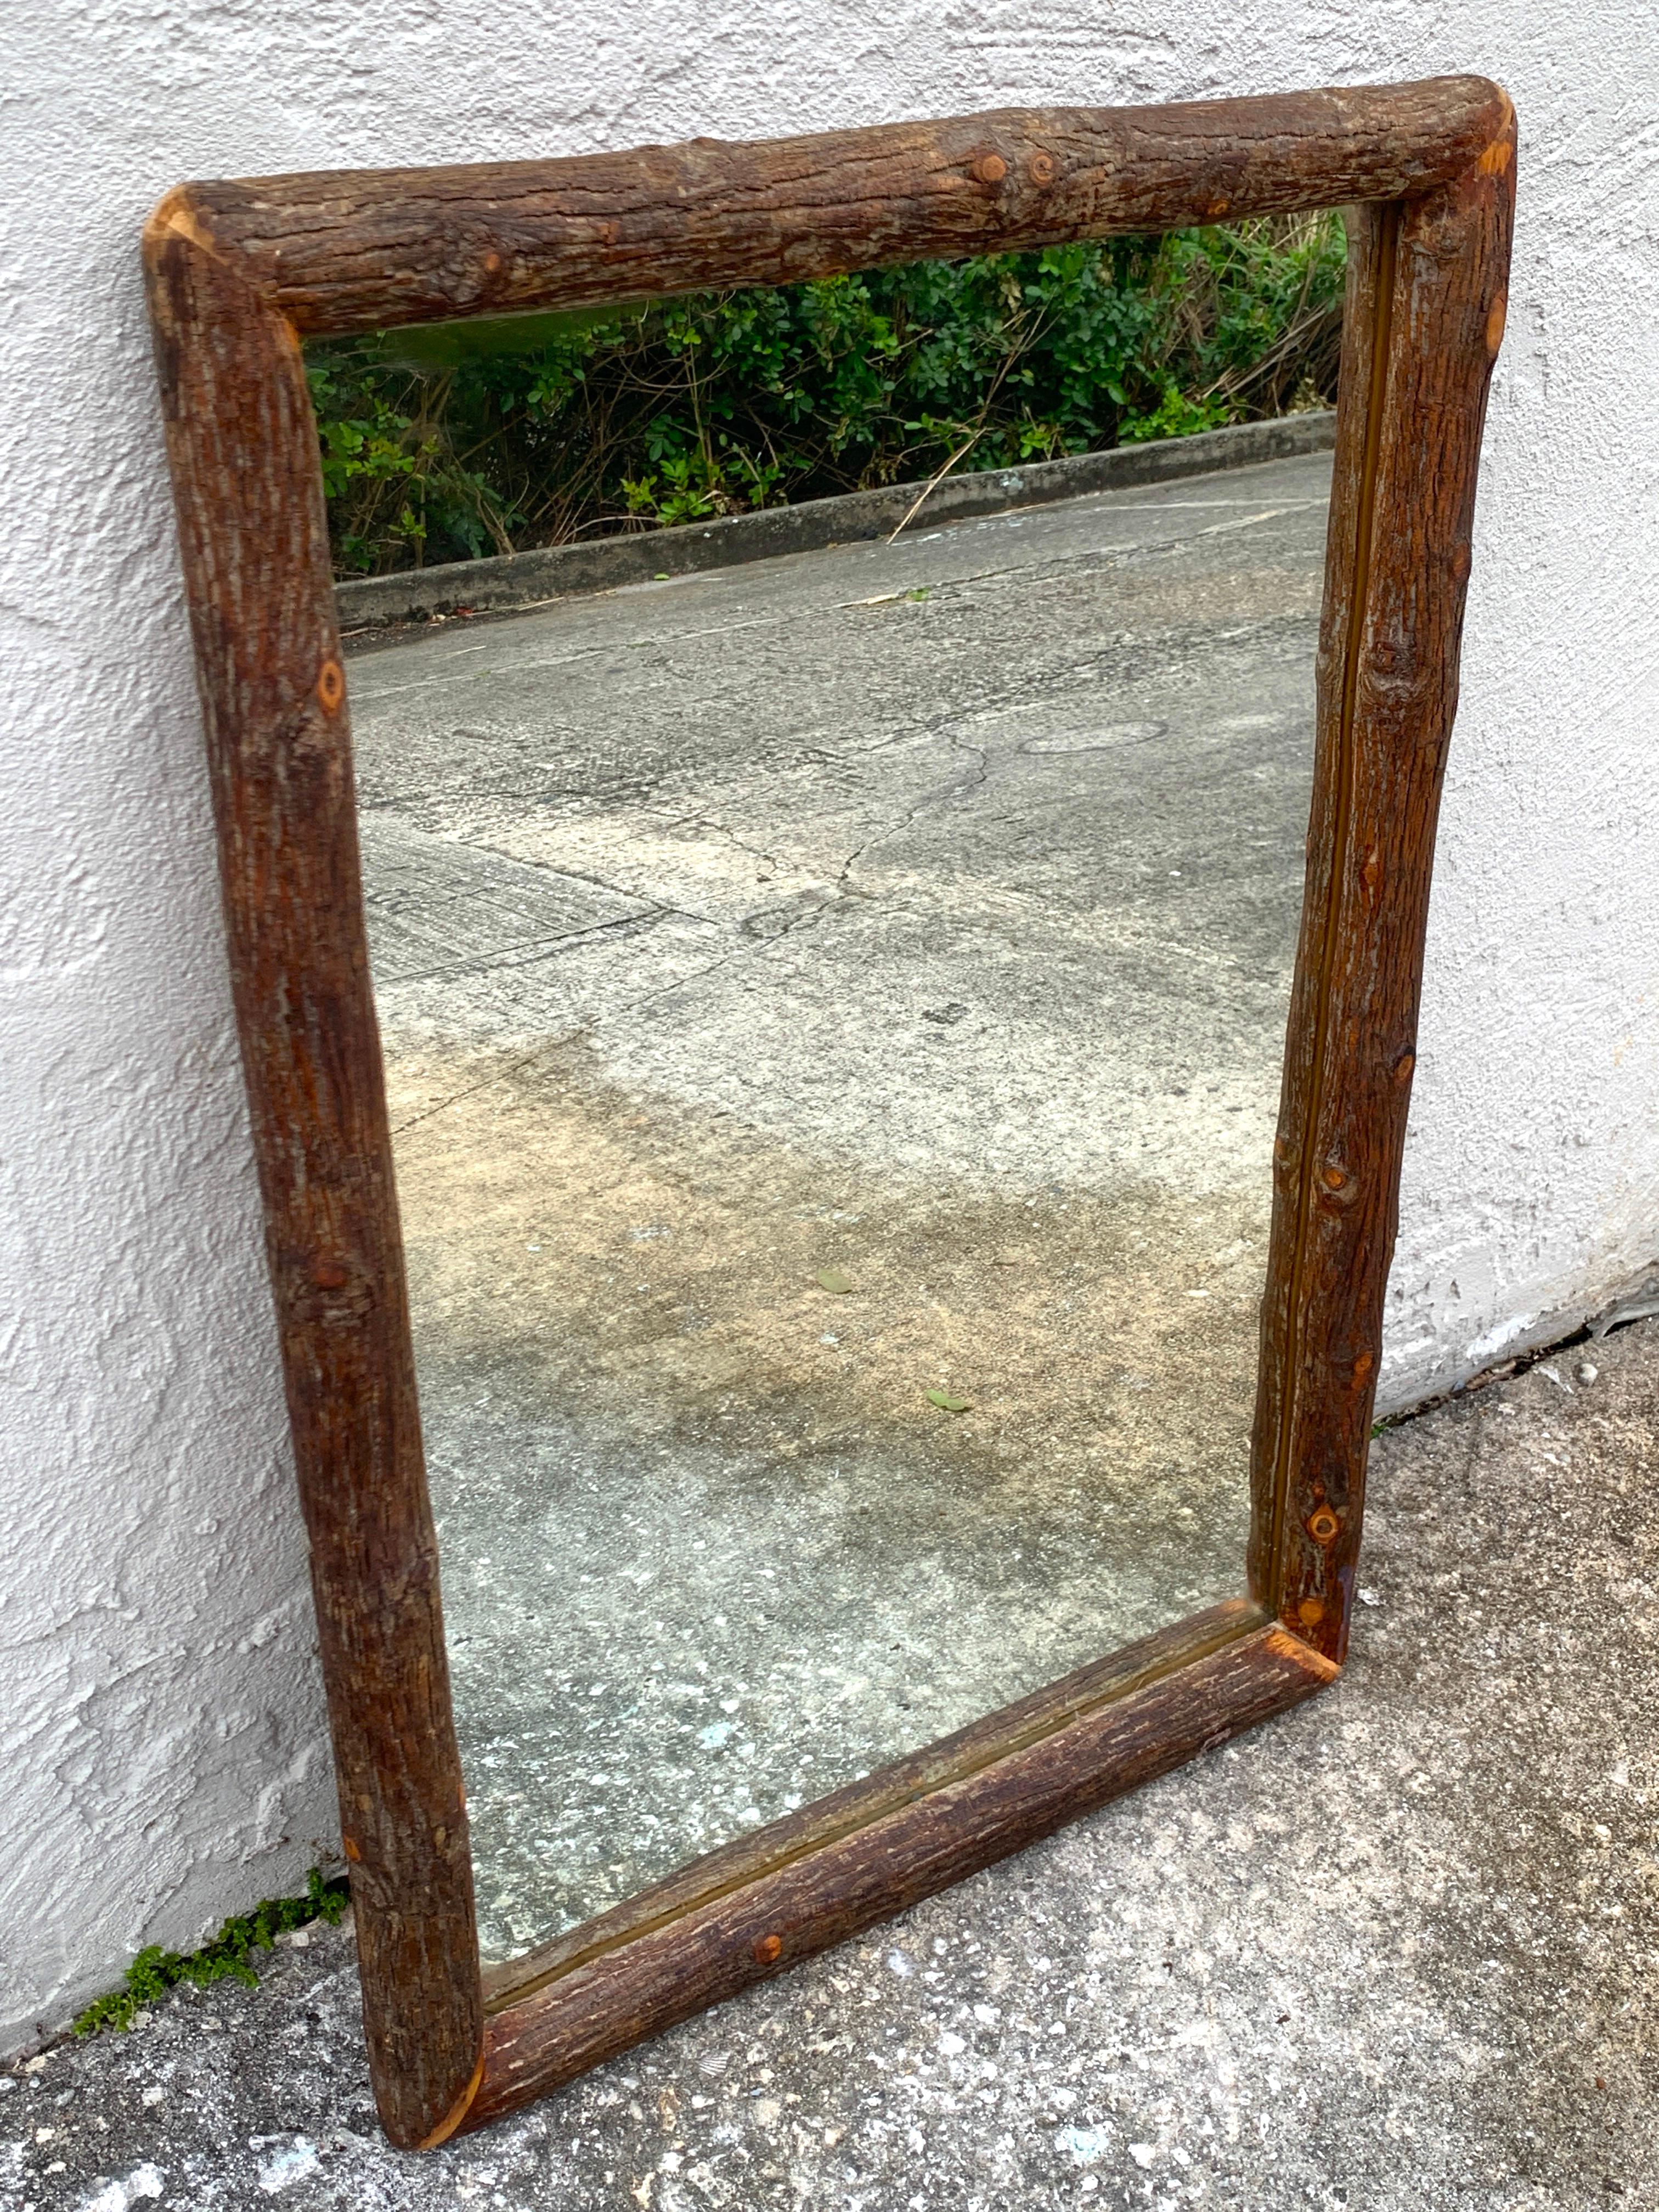 Hand-Carved Vintage Adirondack Mirror by Old Hickory, Multiple Mirrors Available